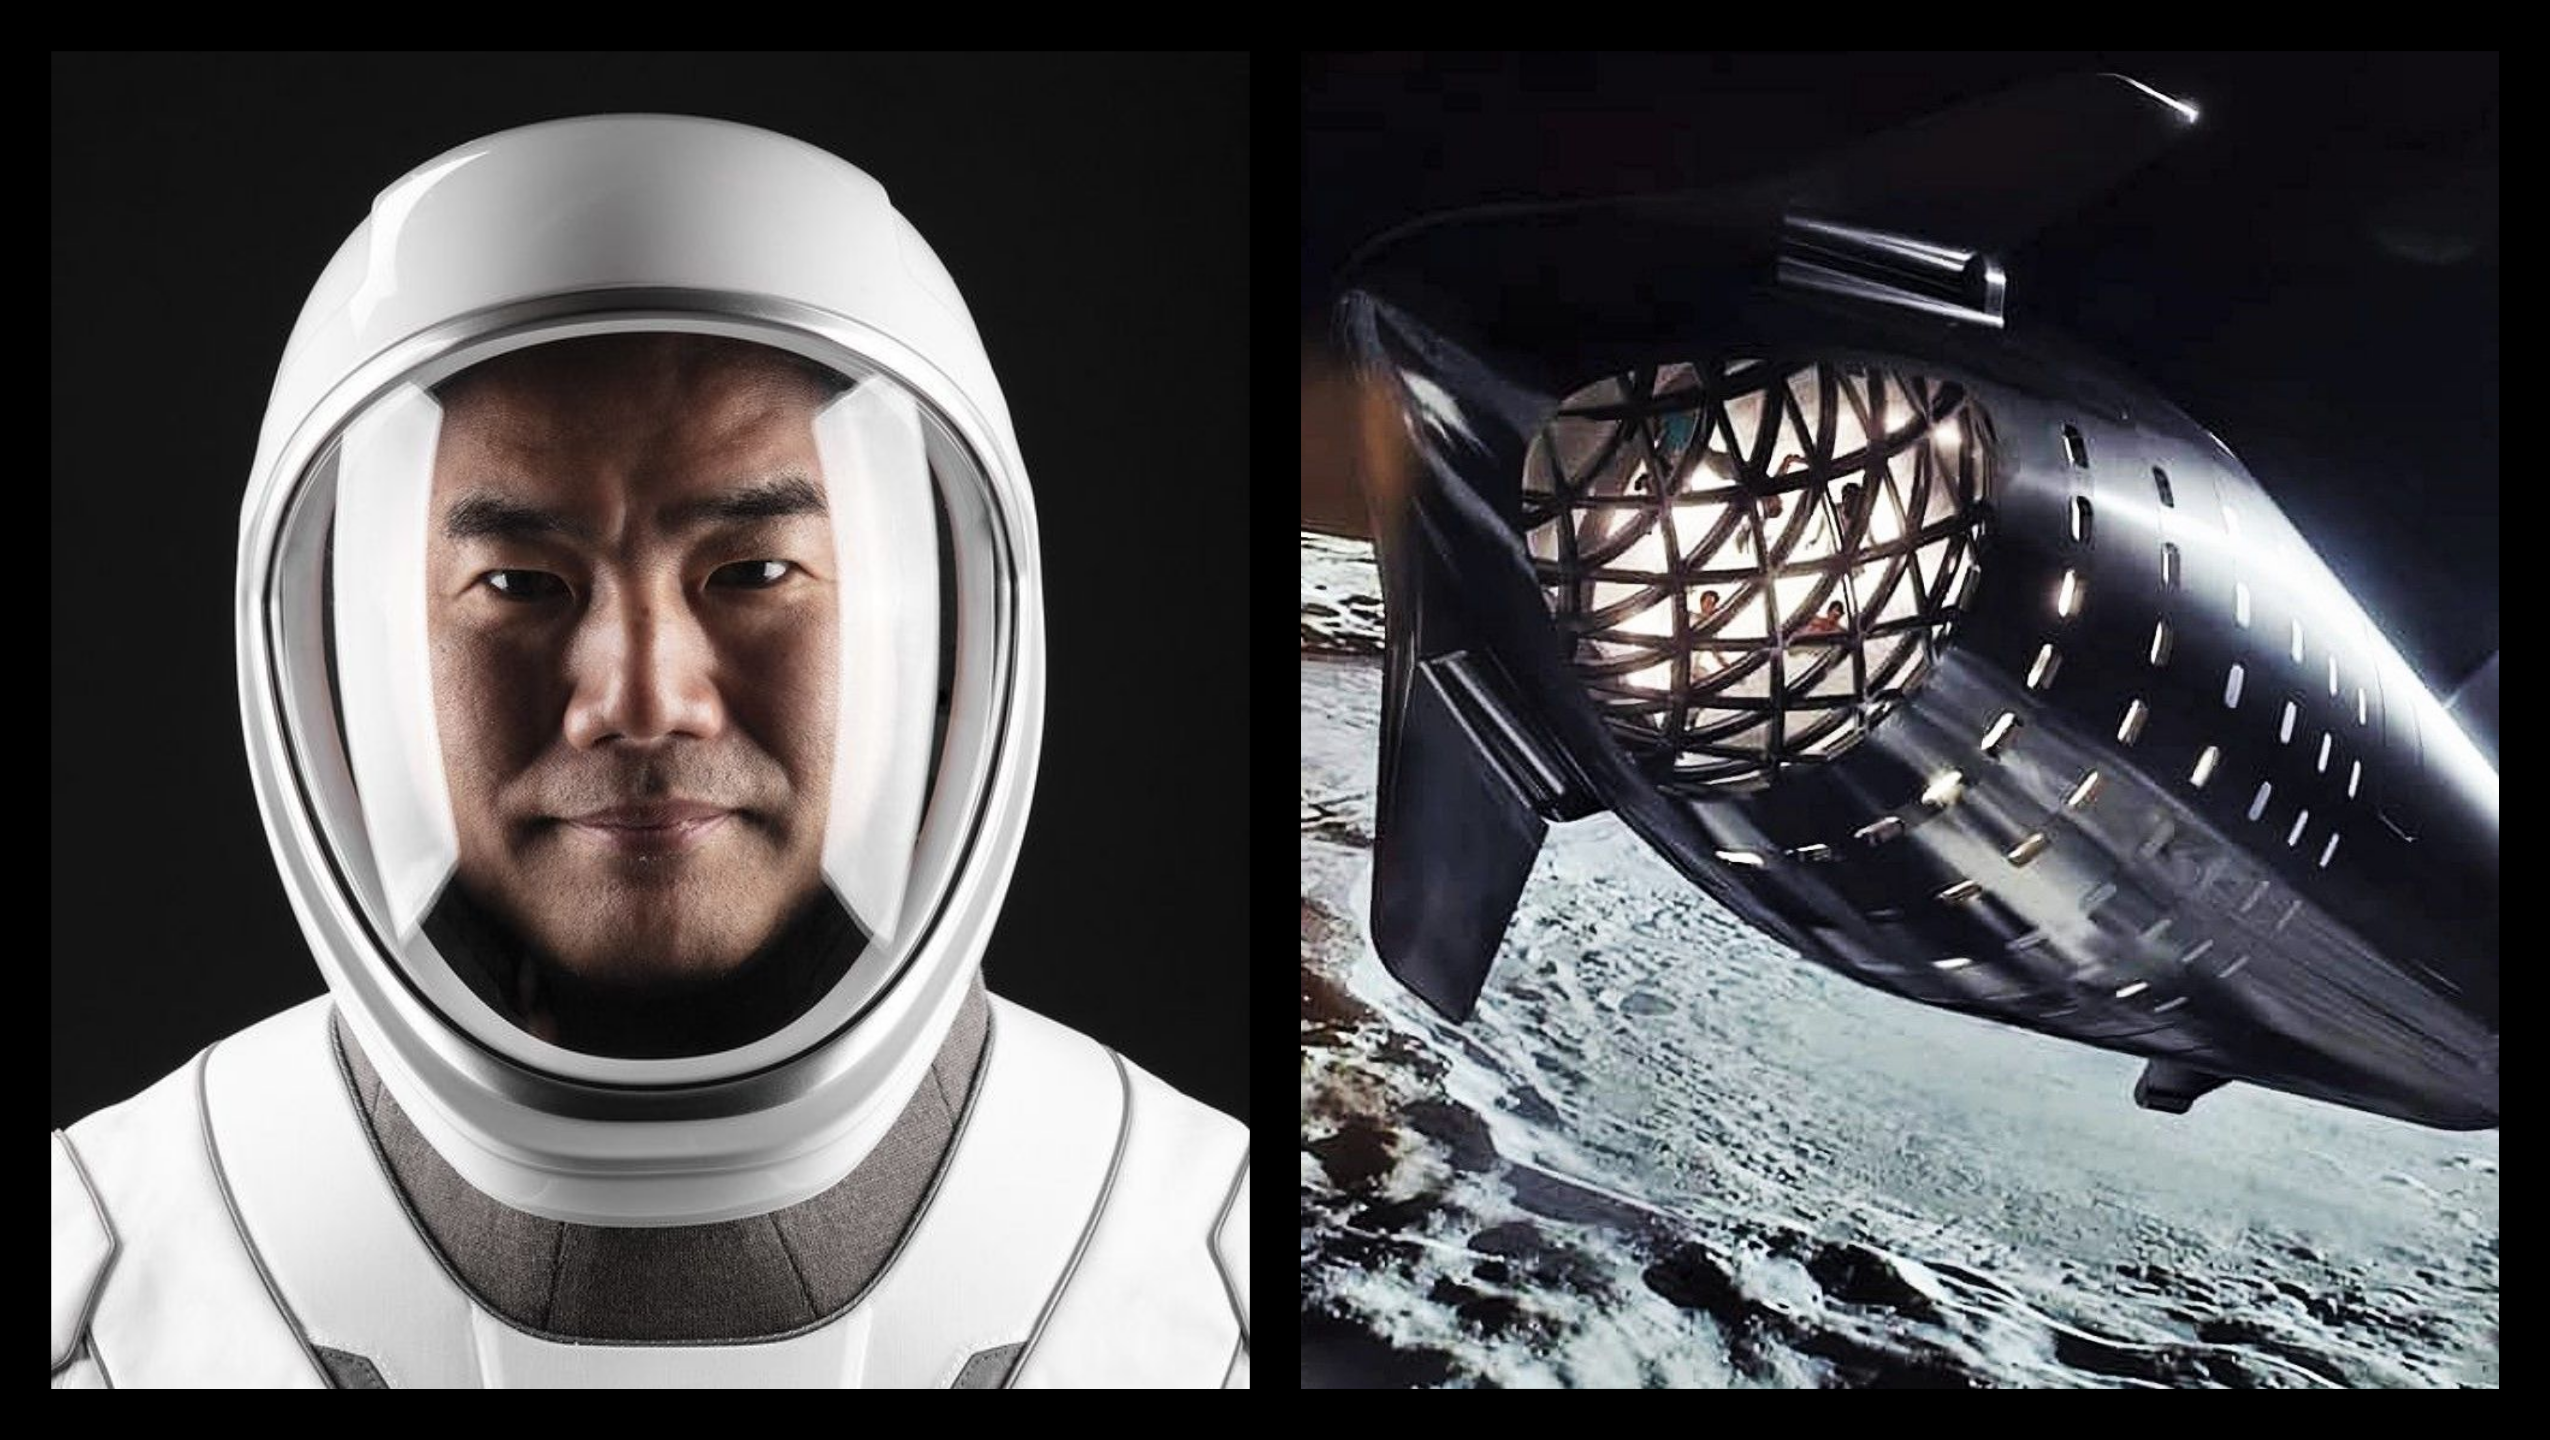 Japanese Astronaut contemplates riding SpaceX's Starship during the 'Dear Moon' voyage